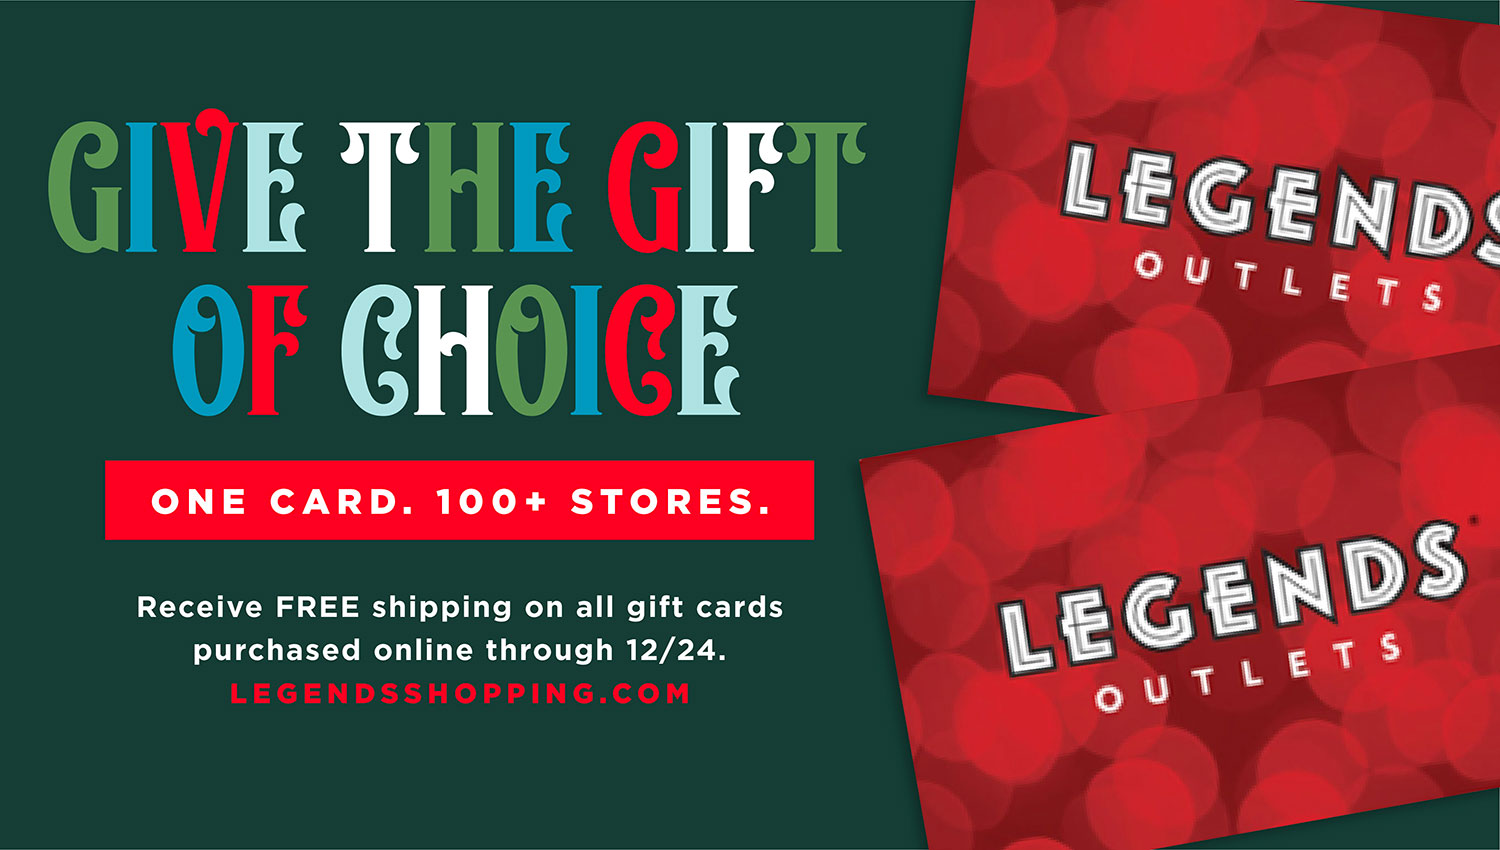 Legends - Give the gift of choice